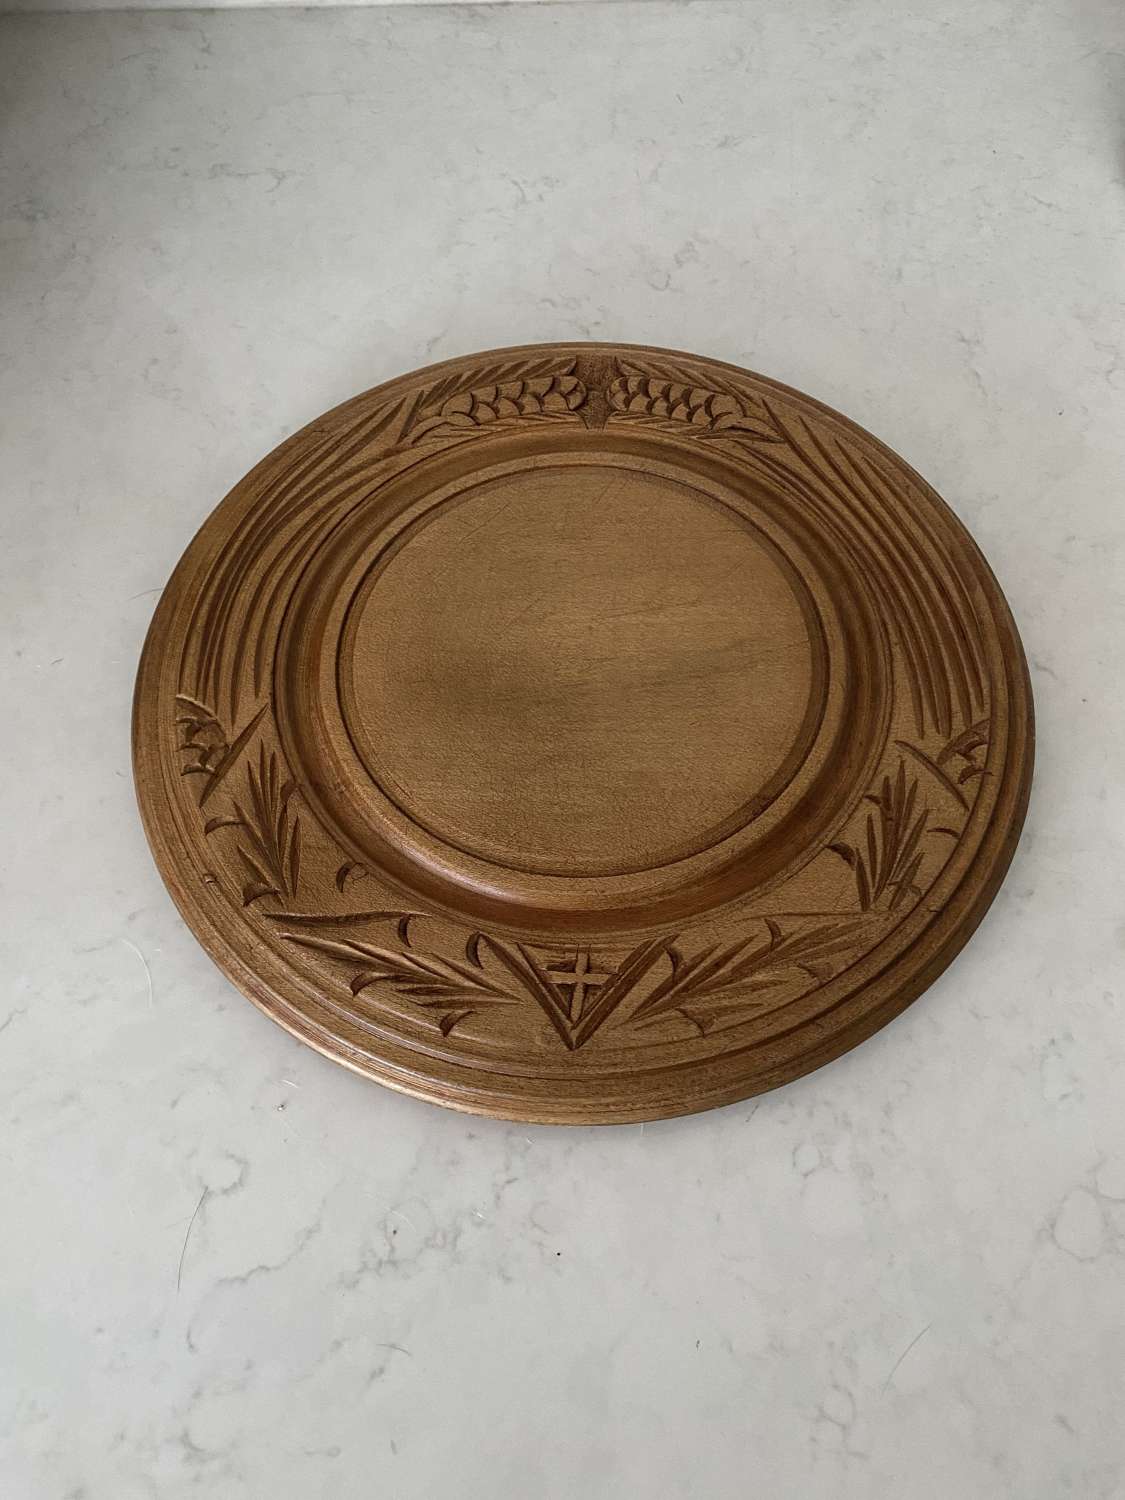 1940s Deeply Carved Bread Board in Excellent Condition